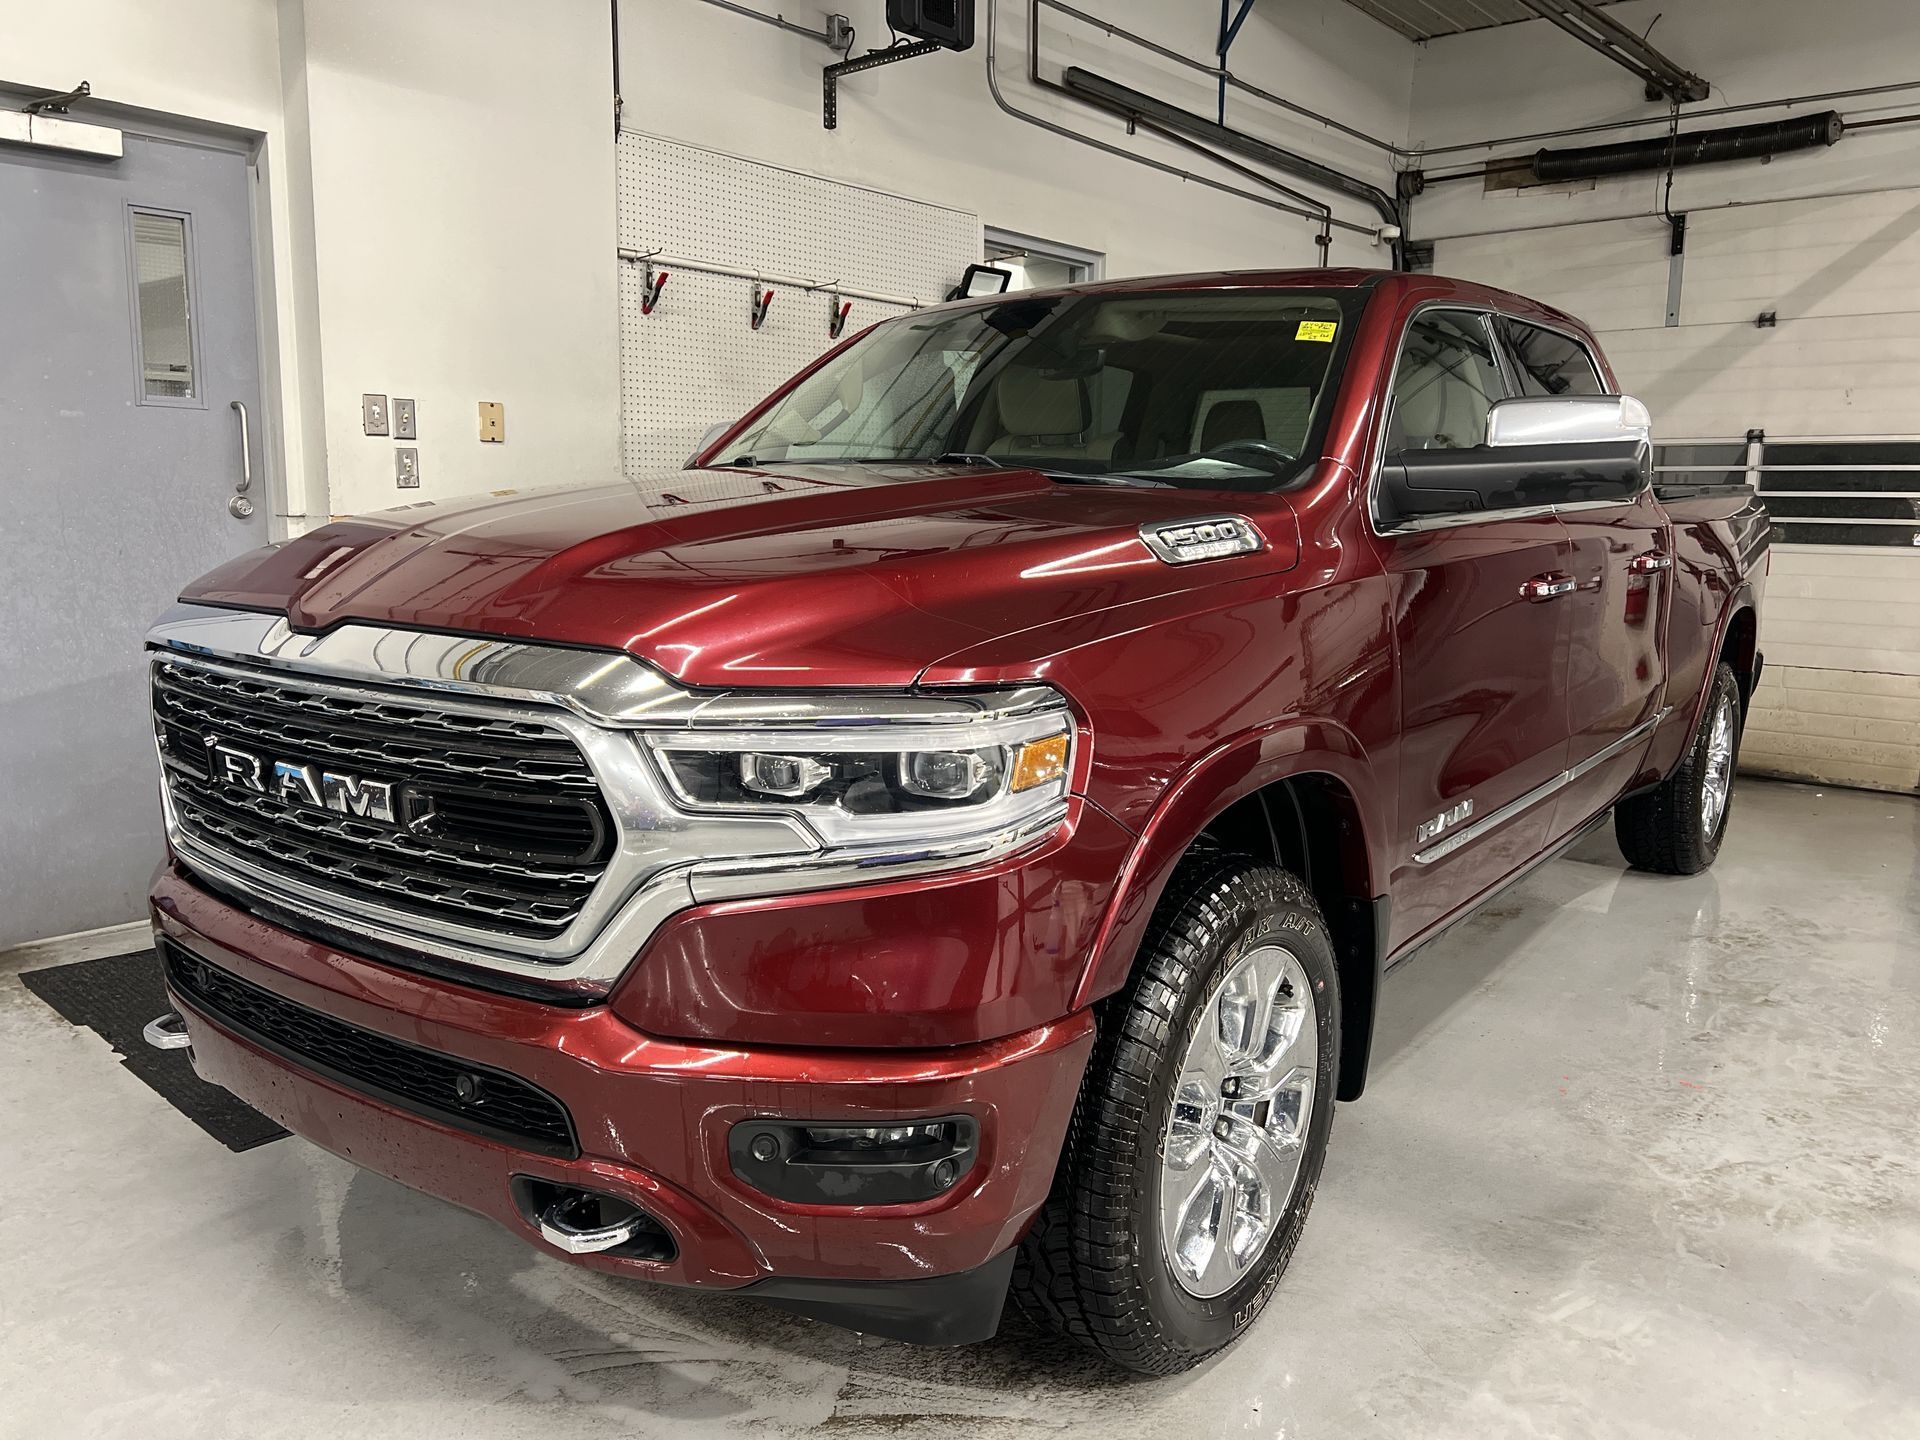 2019 Ram 1500 LIMITED |PANO ROOF |LEATHER |360 CAM |NAV |LOADED!